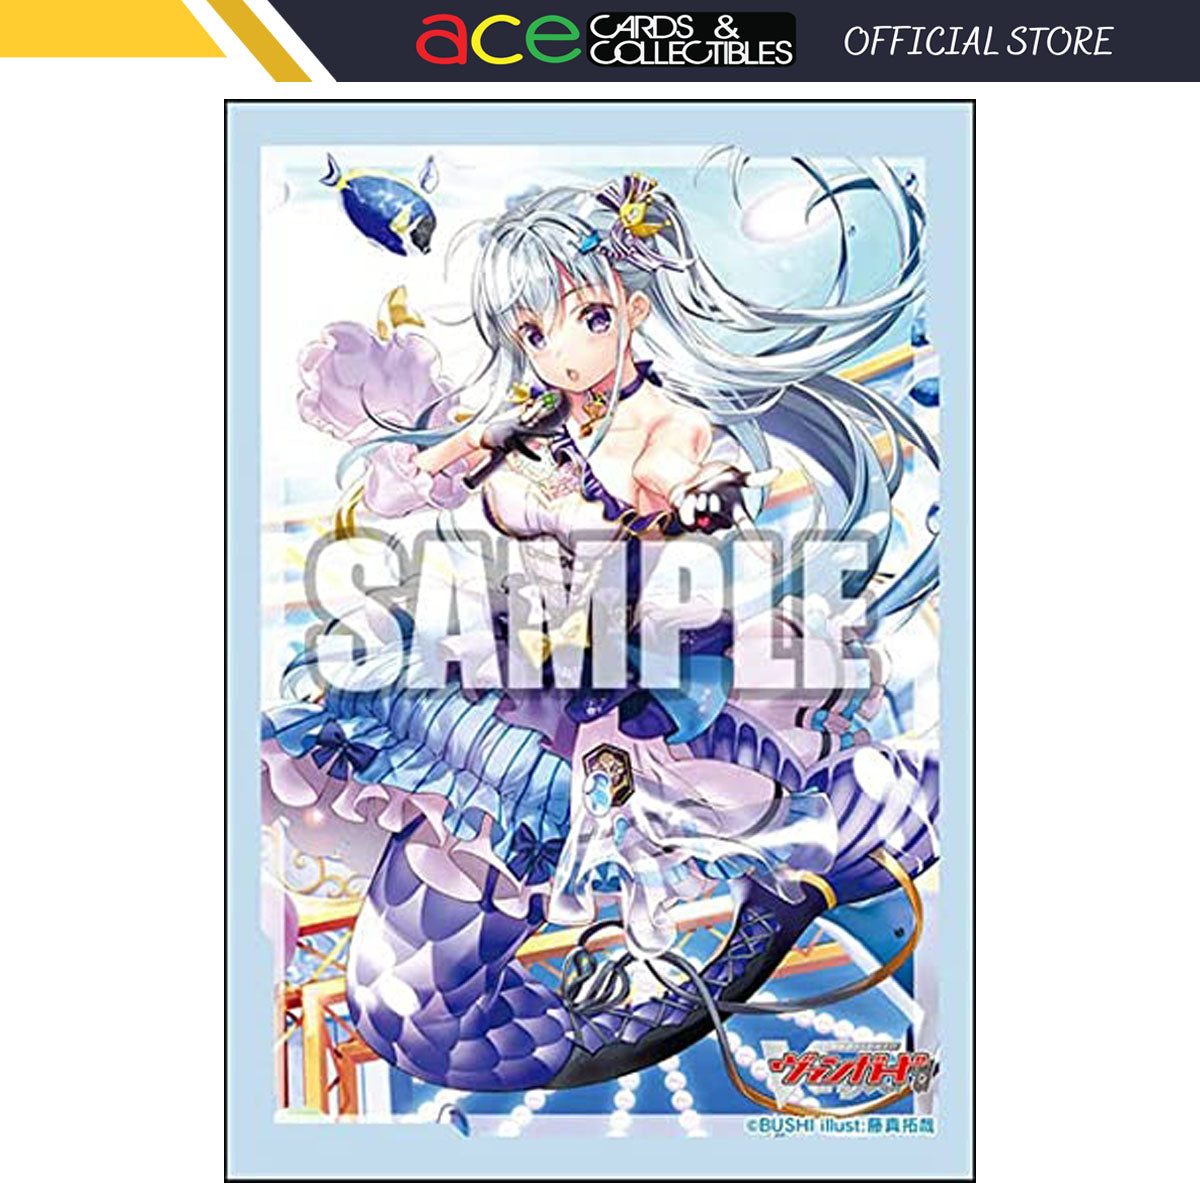 CardFight Vanguard OverDress Sleeve Collection Mini Vol. 590 &quot;Astesice, Kairi&quot;-Bushiroad-Ace Cards &amp; Collectibles